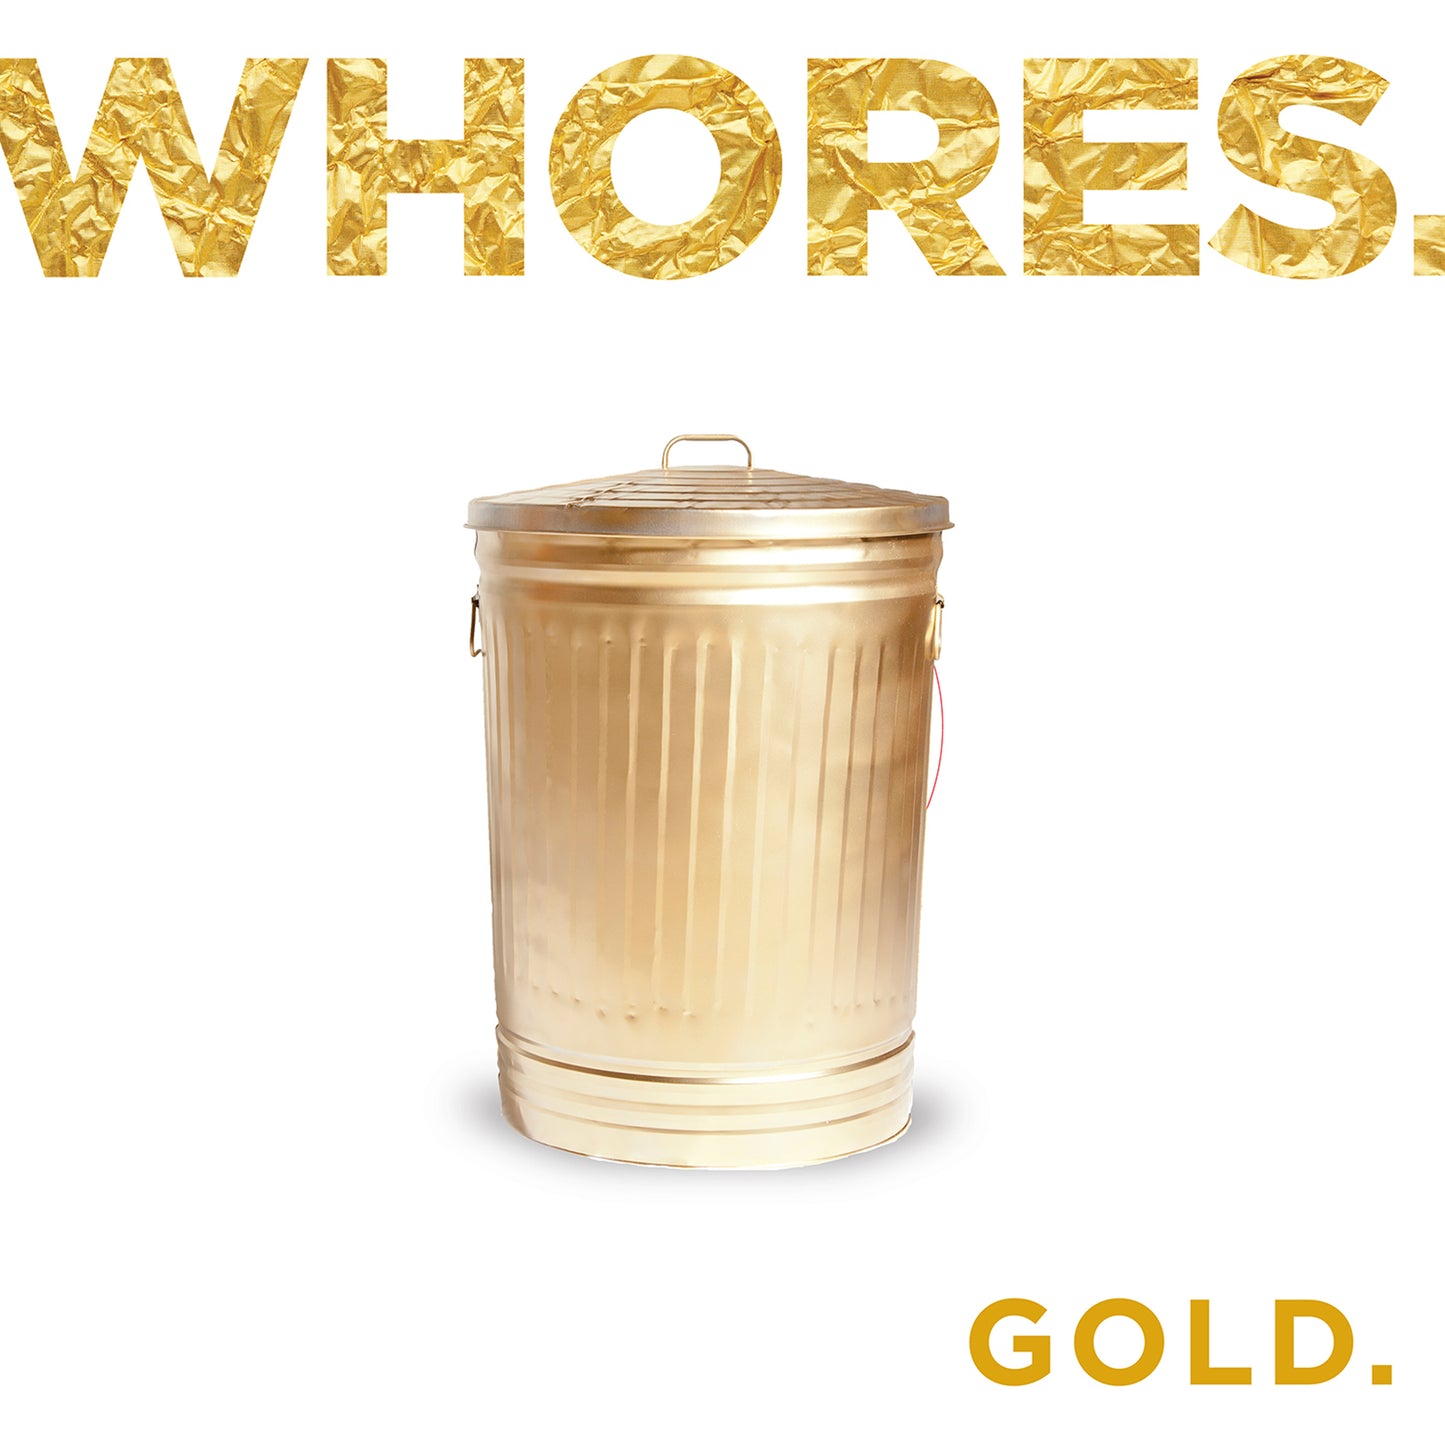 Whores "Gold" CD